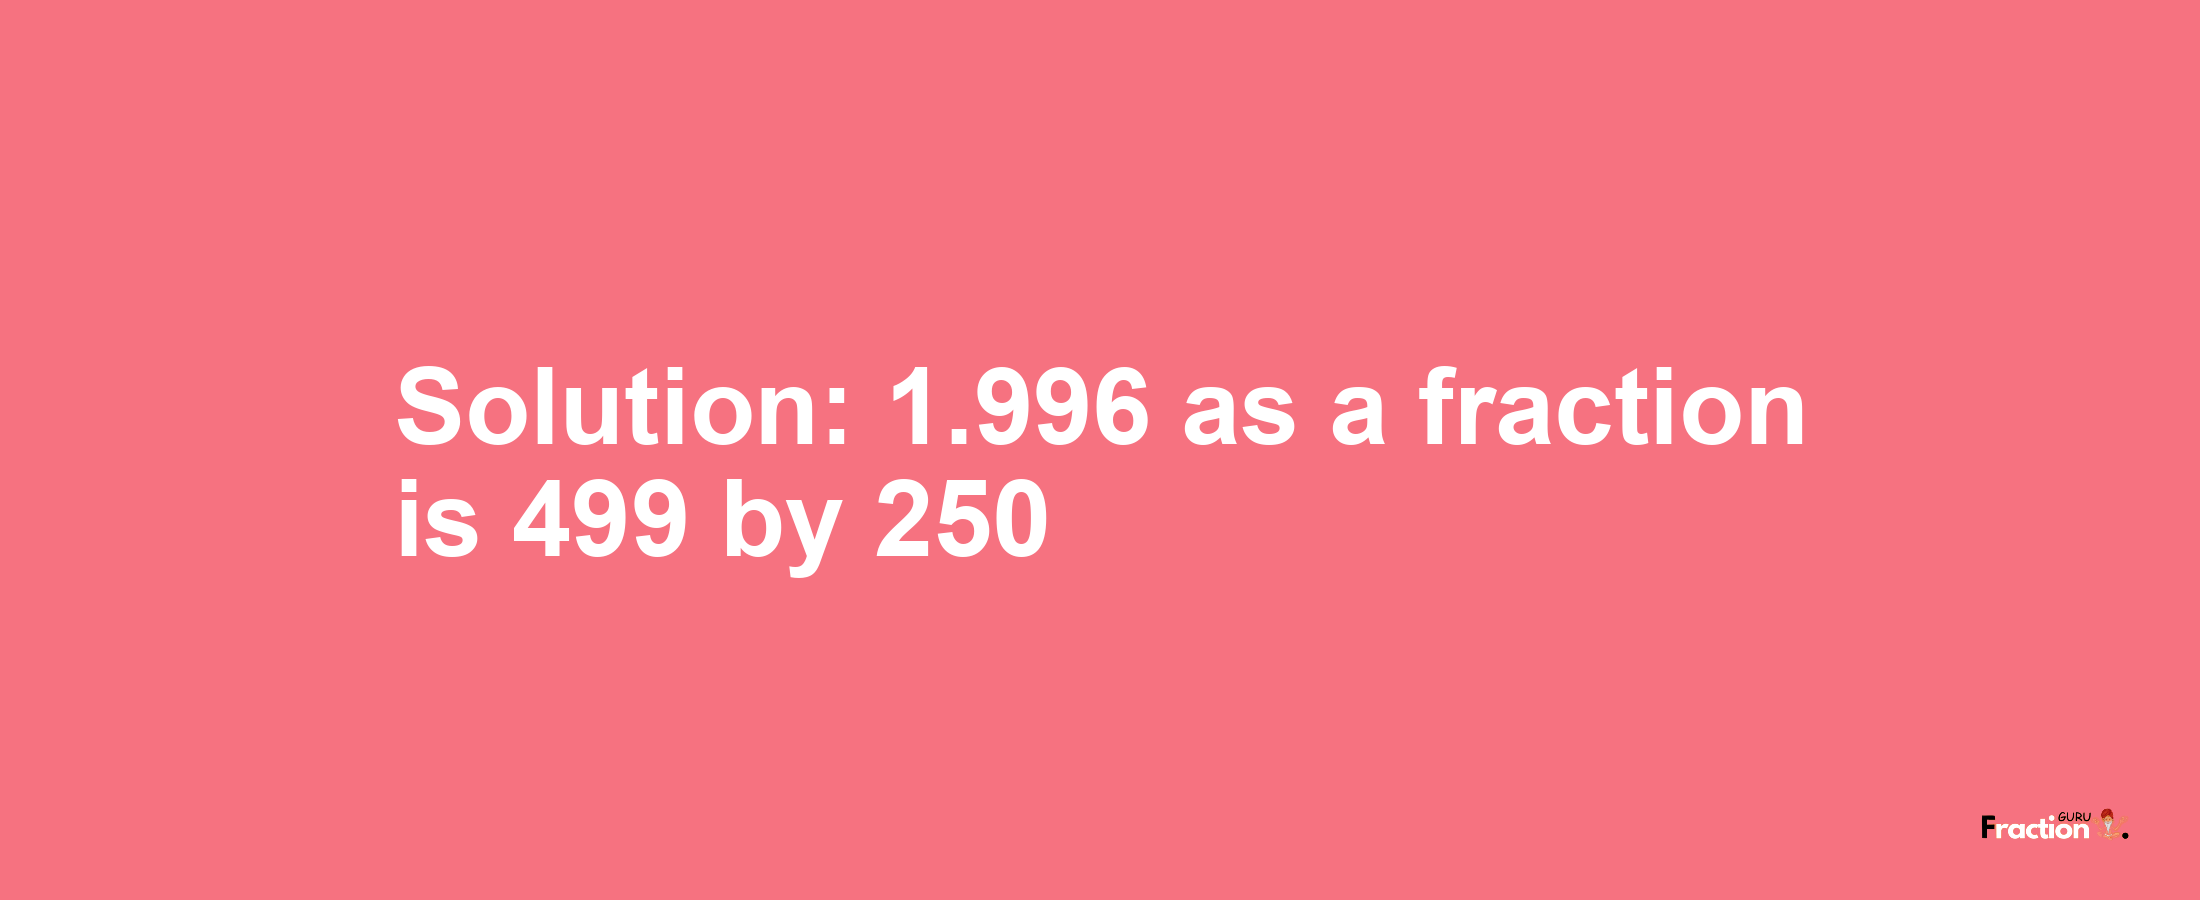 Solution:1.996 as a fraction is 499/250